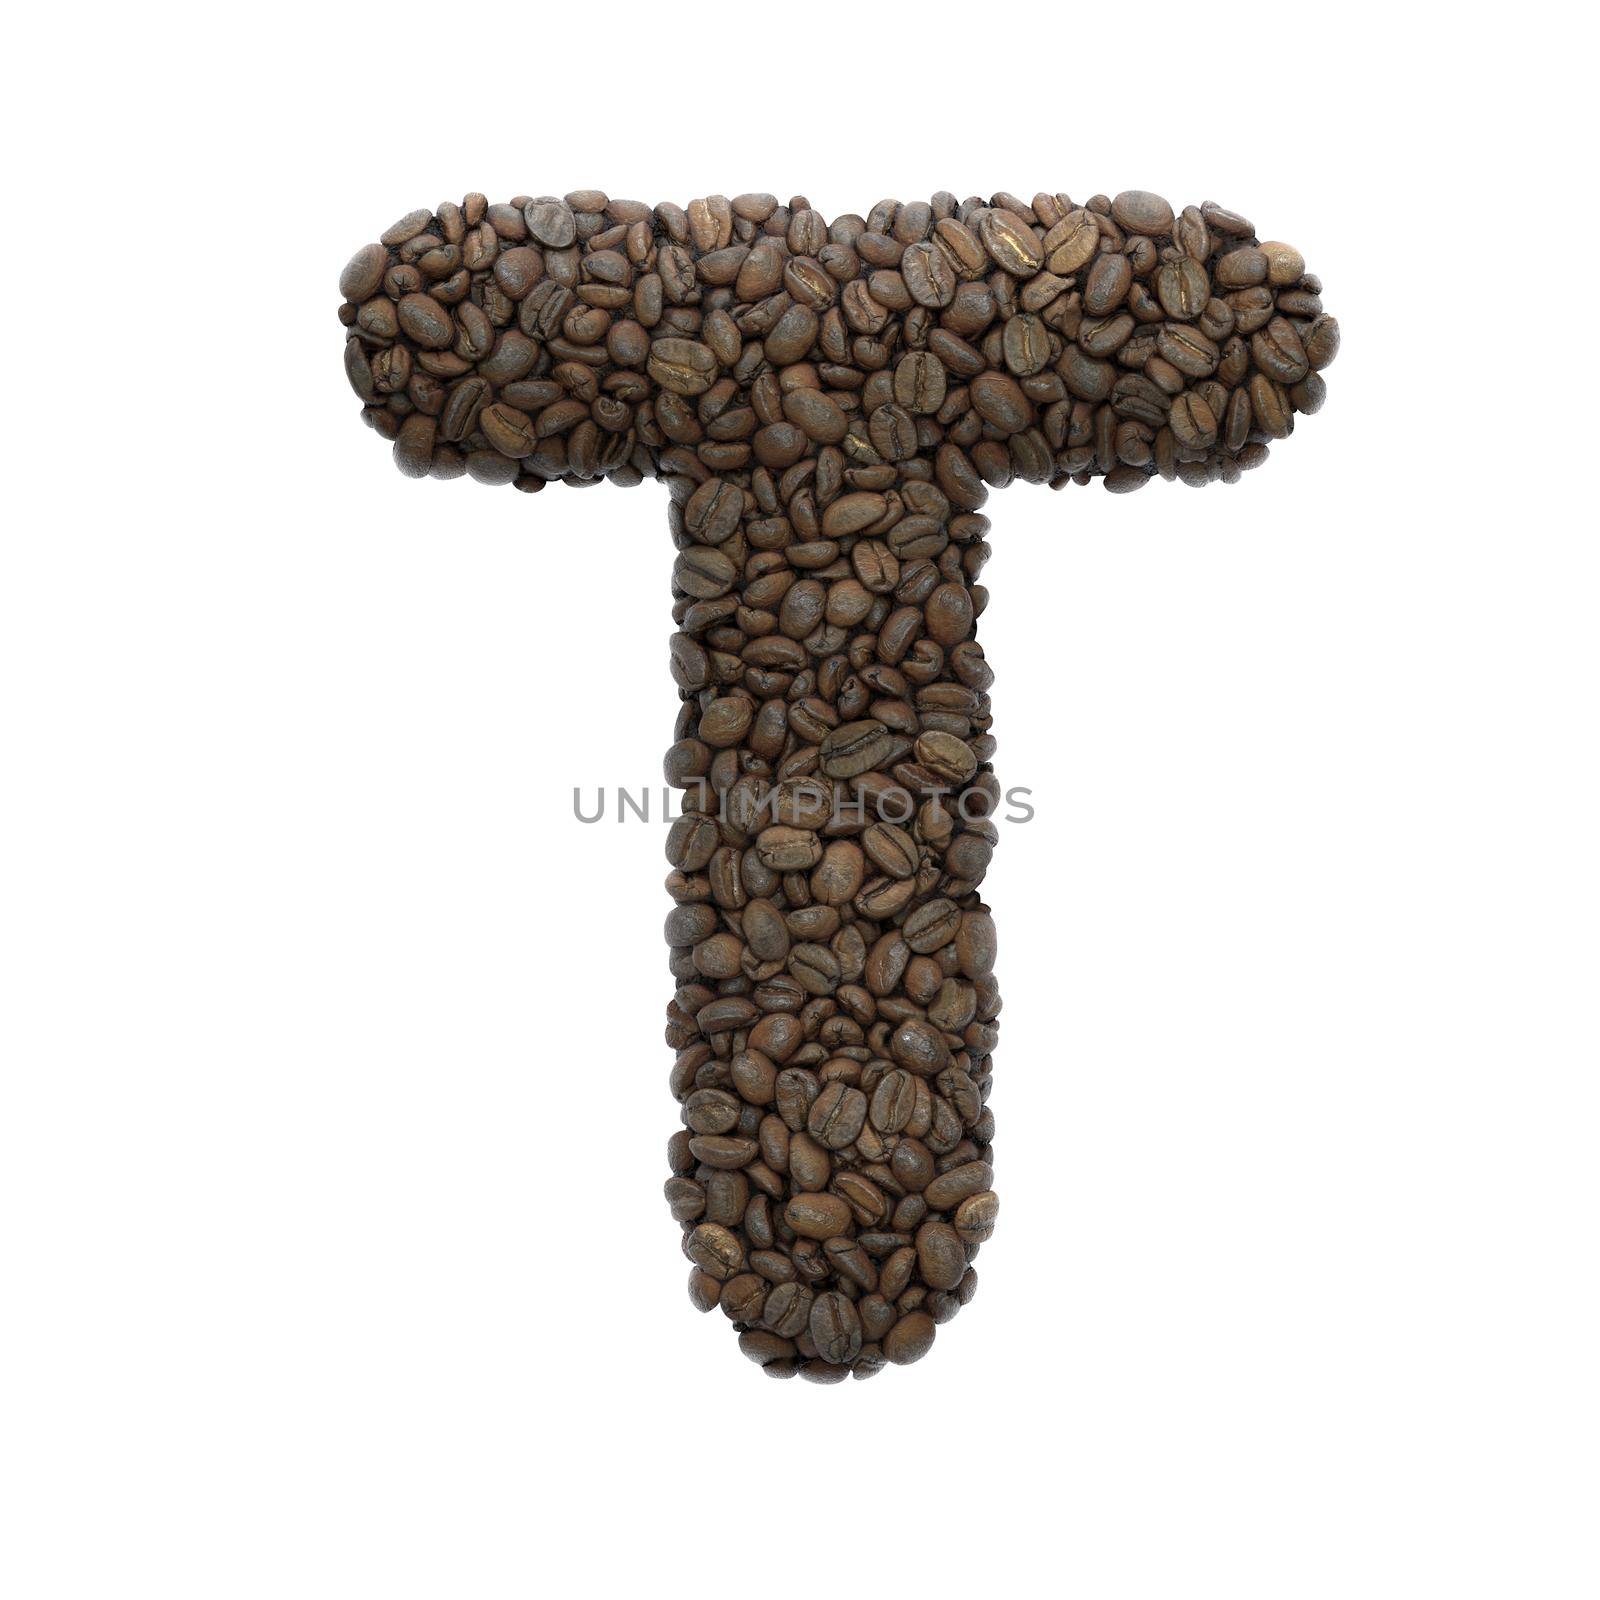 Coffee letter T - Uppercase 3d roasted beans font - suitable for Coffee, energy or insomnia related subjects by chrisroll